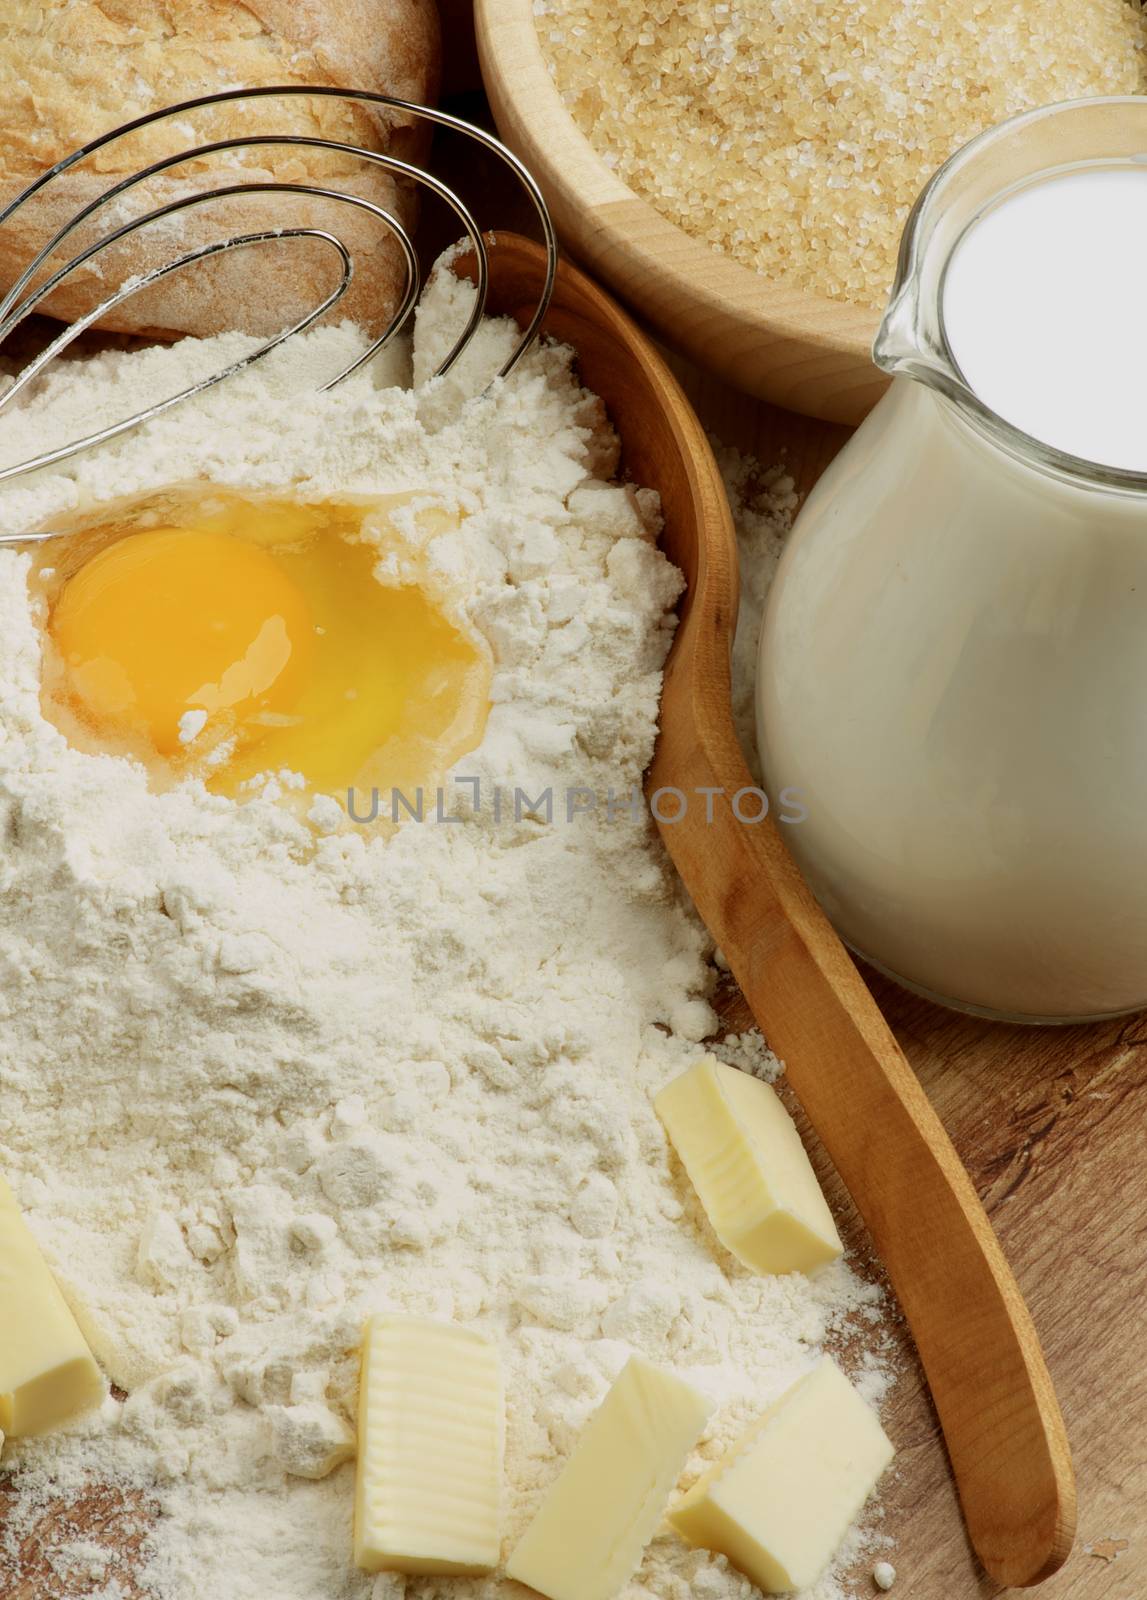 Preparing Homemade Dough with Ingredients, Wooden Spoon and Egg Whisk closeup on Wooden Cutting Board